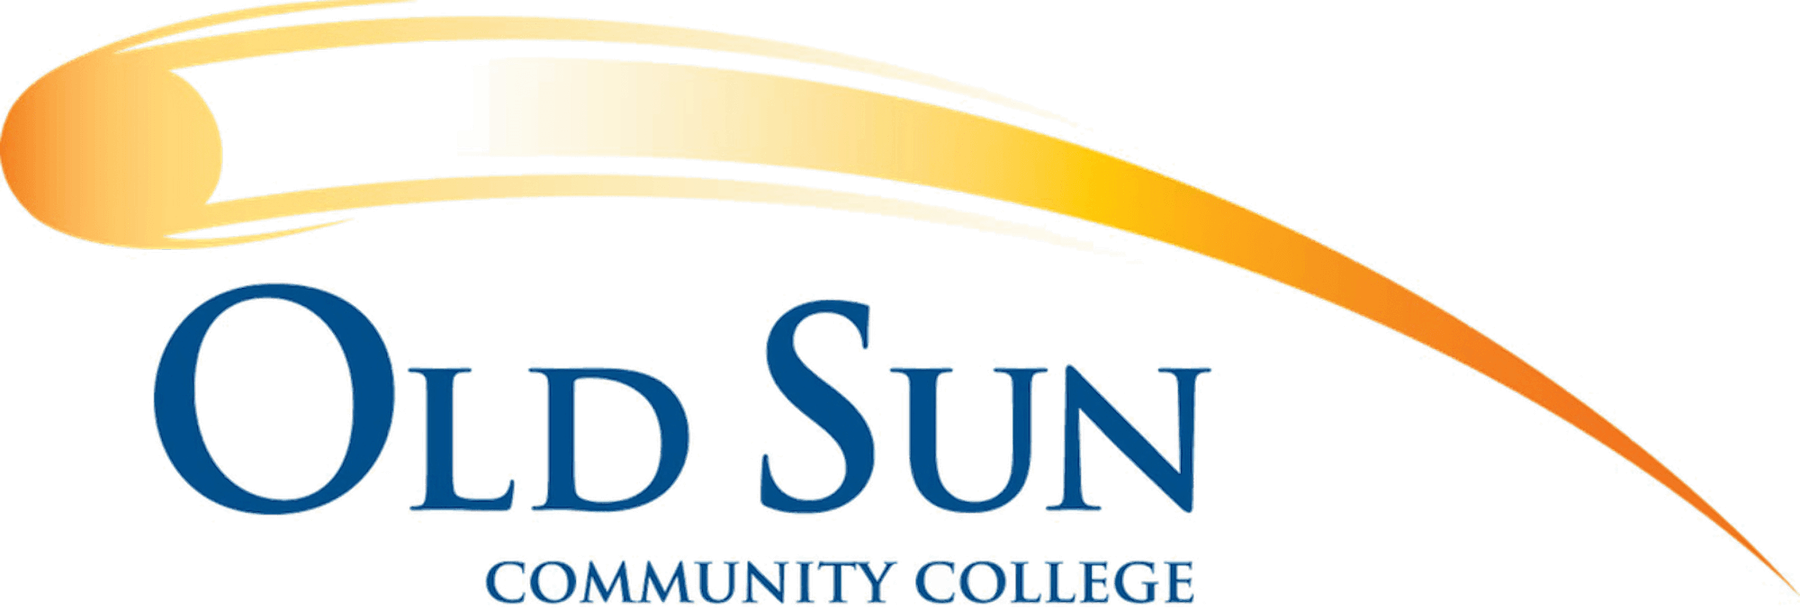 Old Sun Community College in color on a transparent background